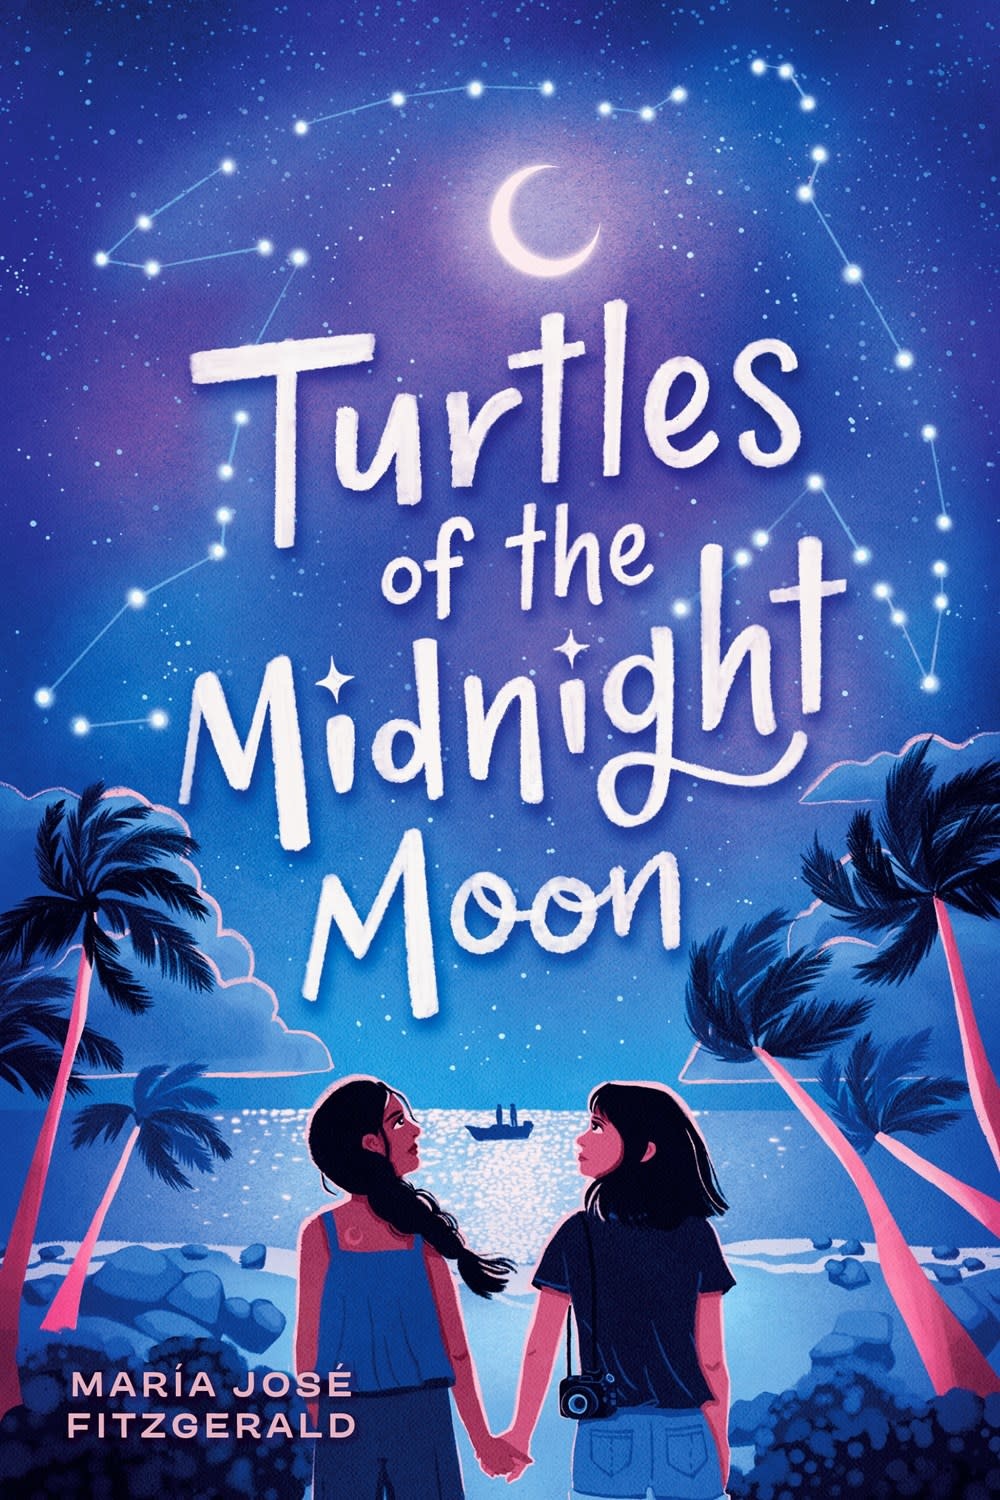 Knopf Books for Young Readers Turtles of the Midnight Moon